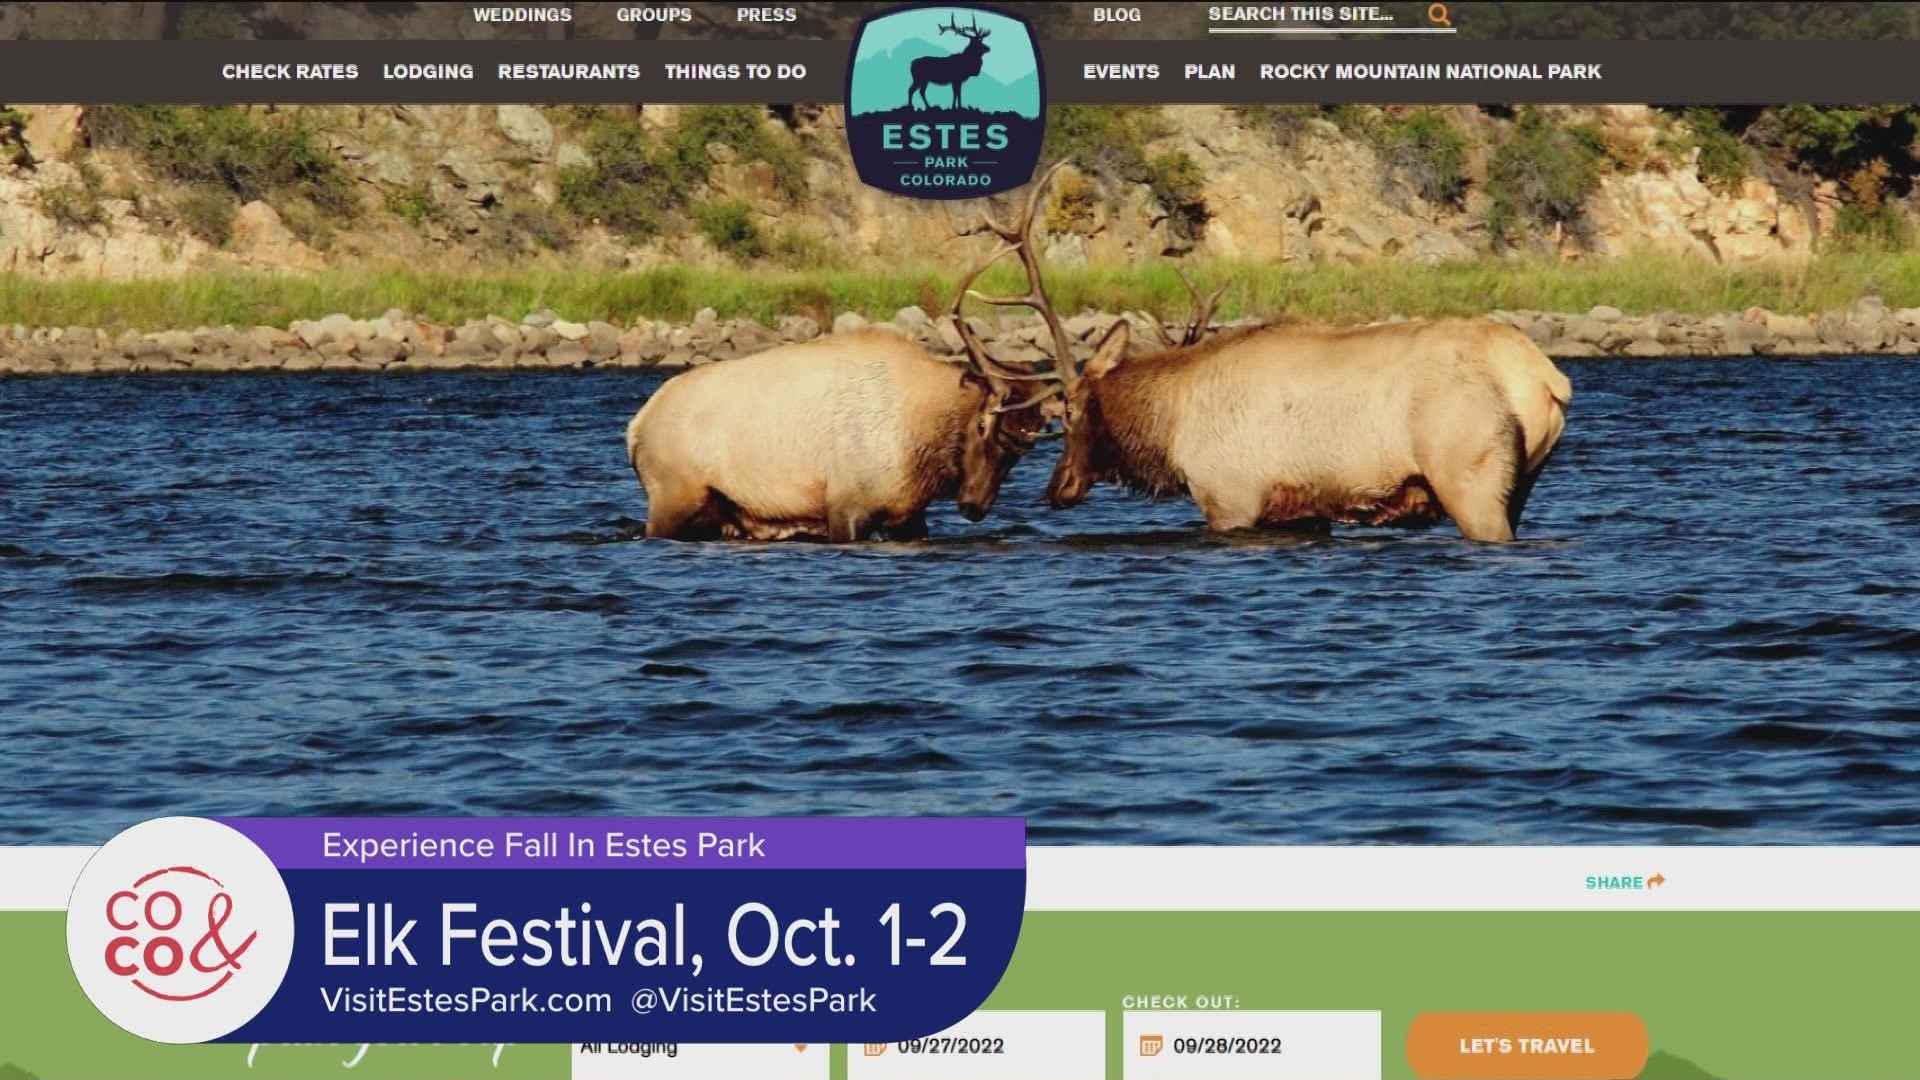 The Elk Festival is this weekend in Estes Park! Learn more and find a calendar of all the upcoming events at VisitEstesPark.com.